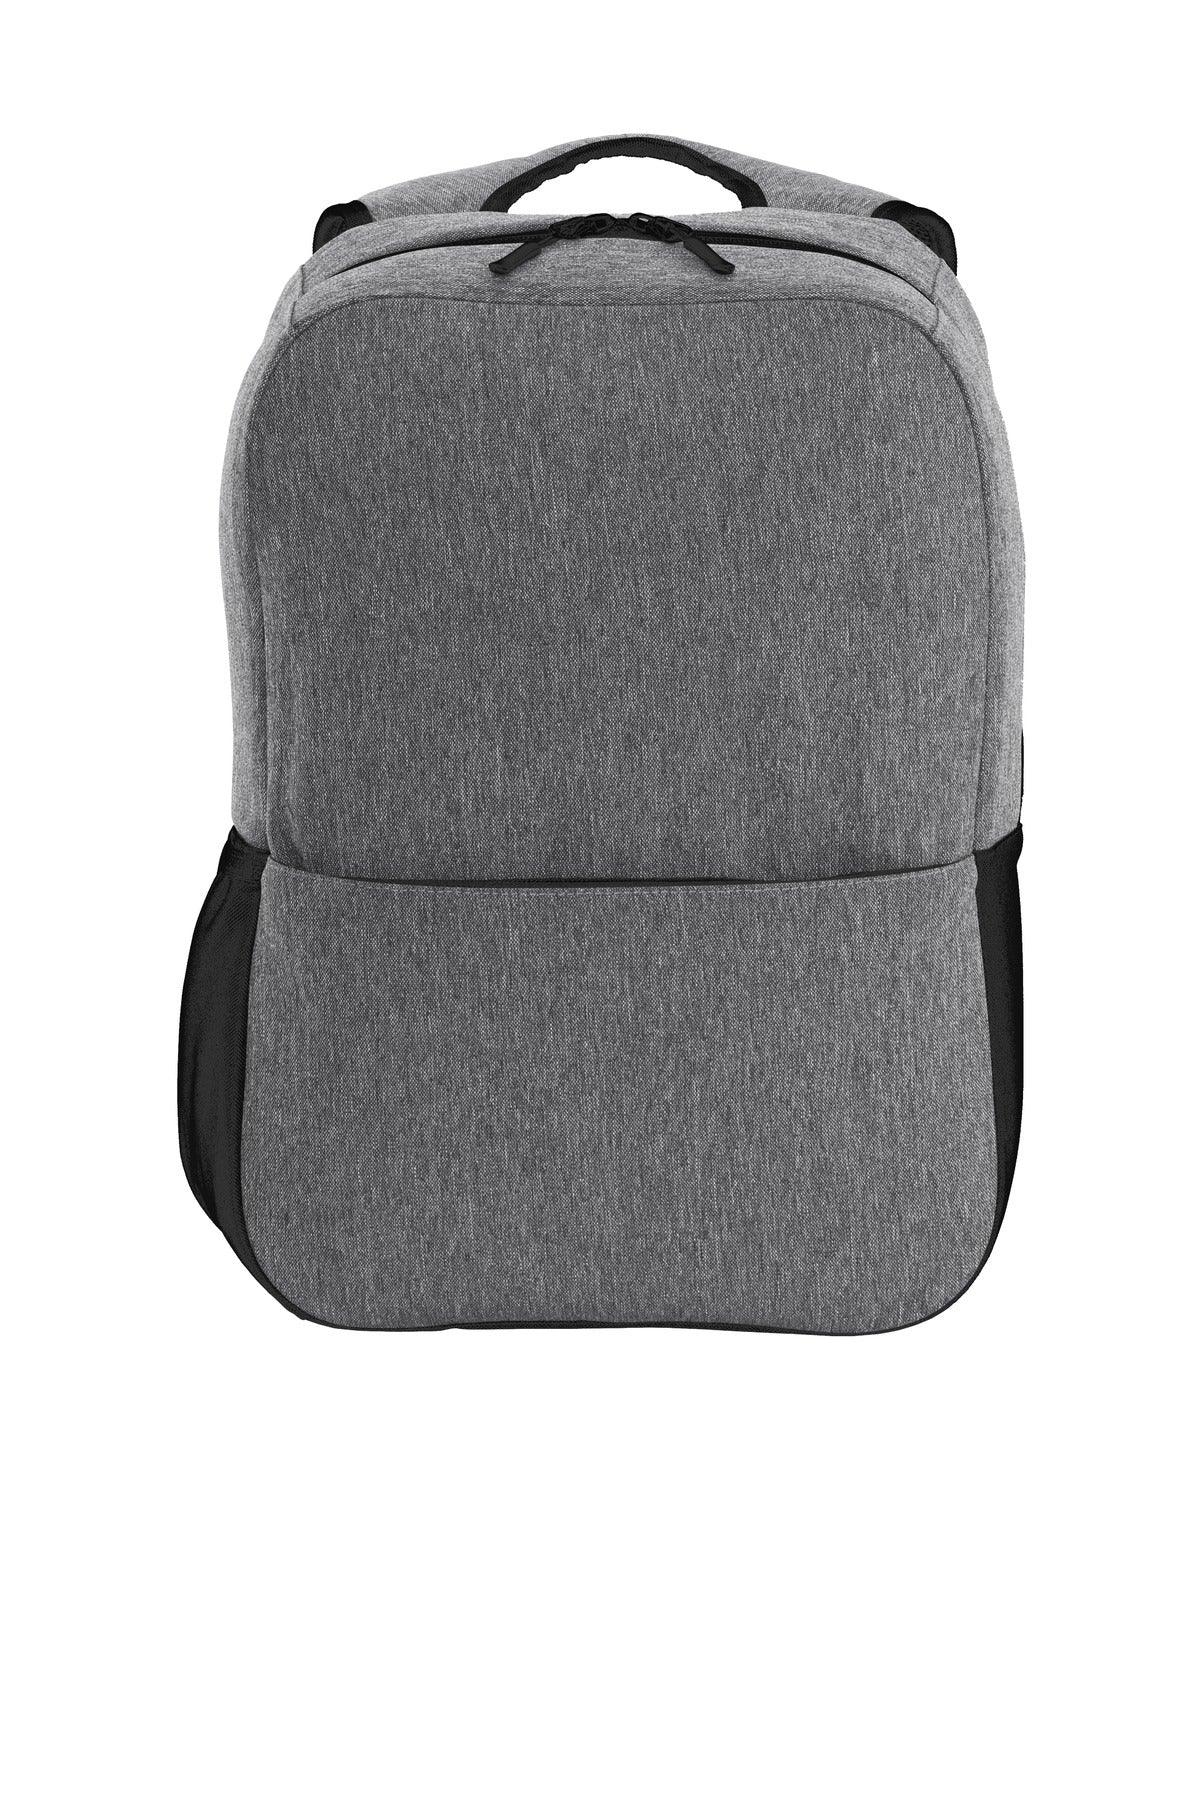 Port Authority Access Square Backpack. BG218 - Dresses Max